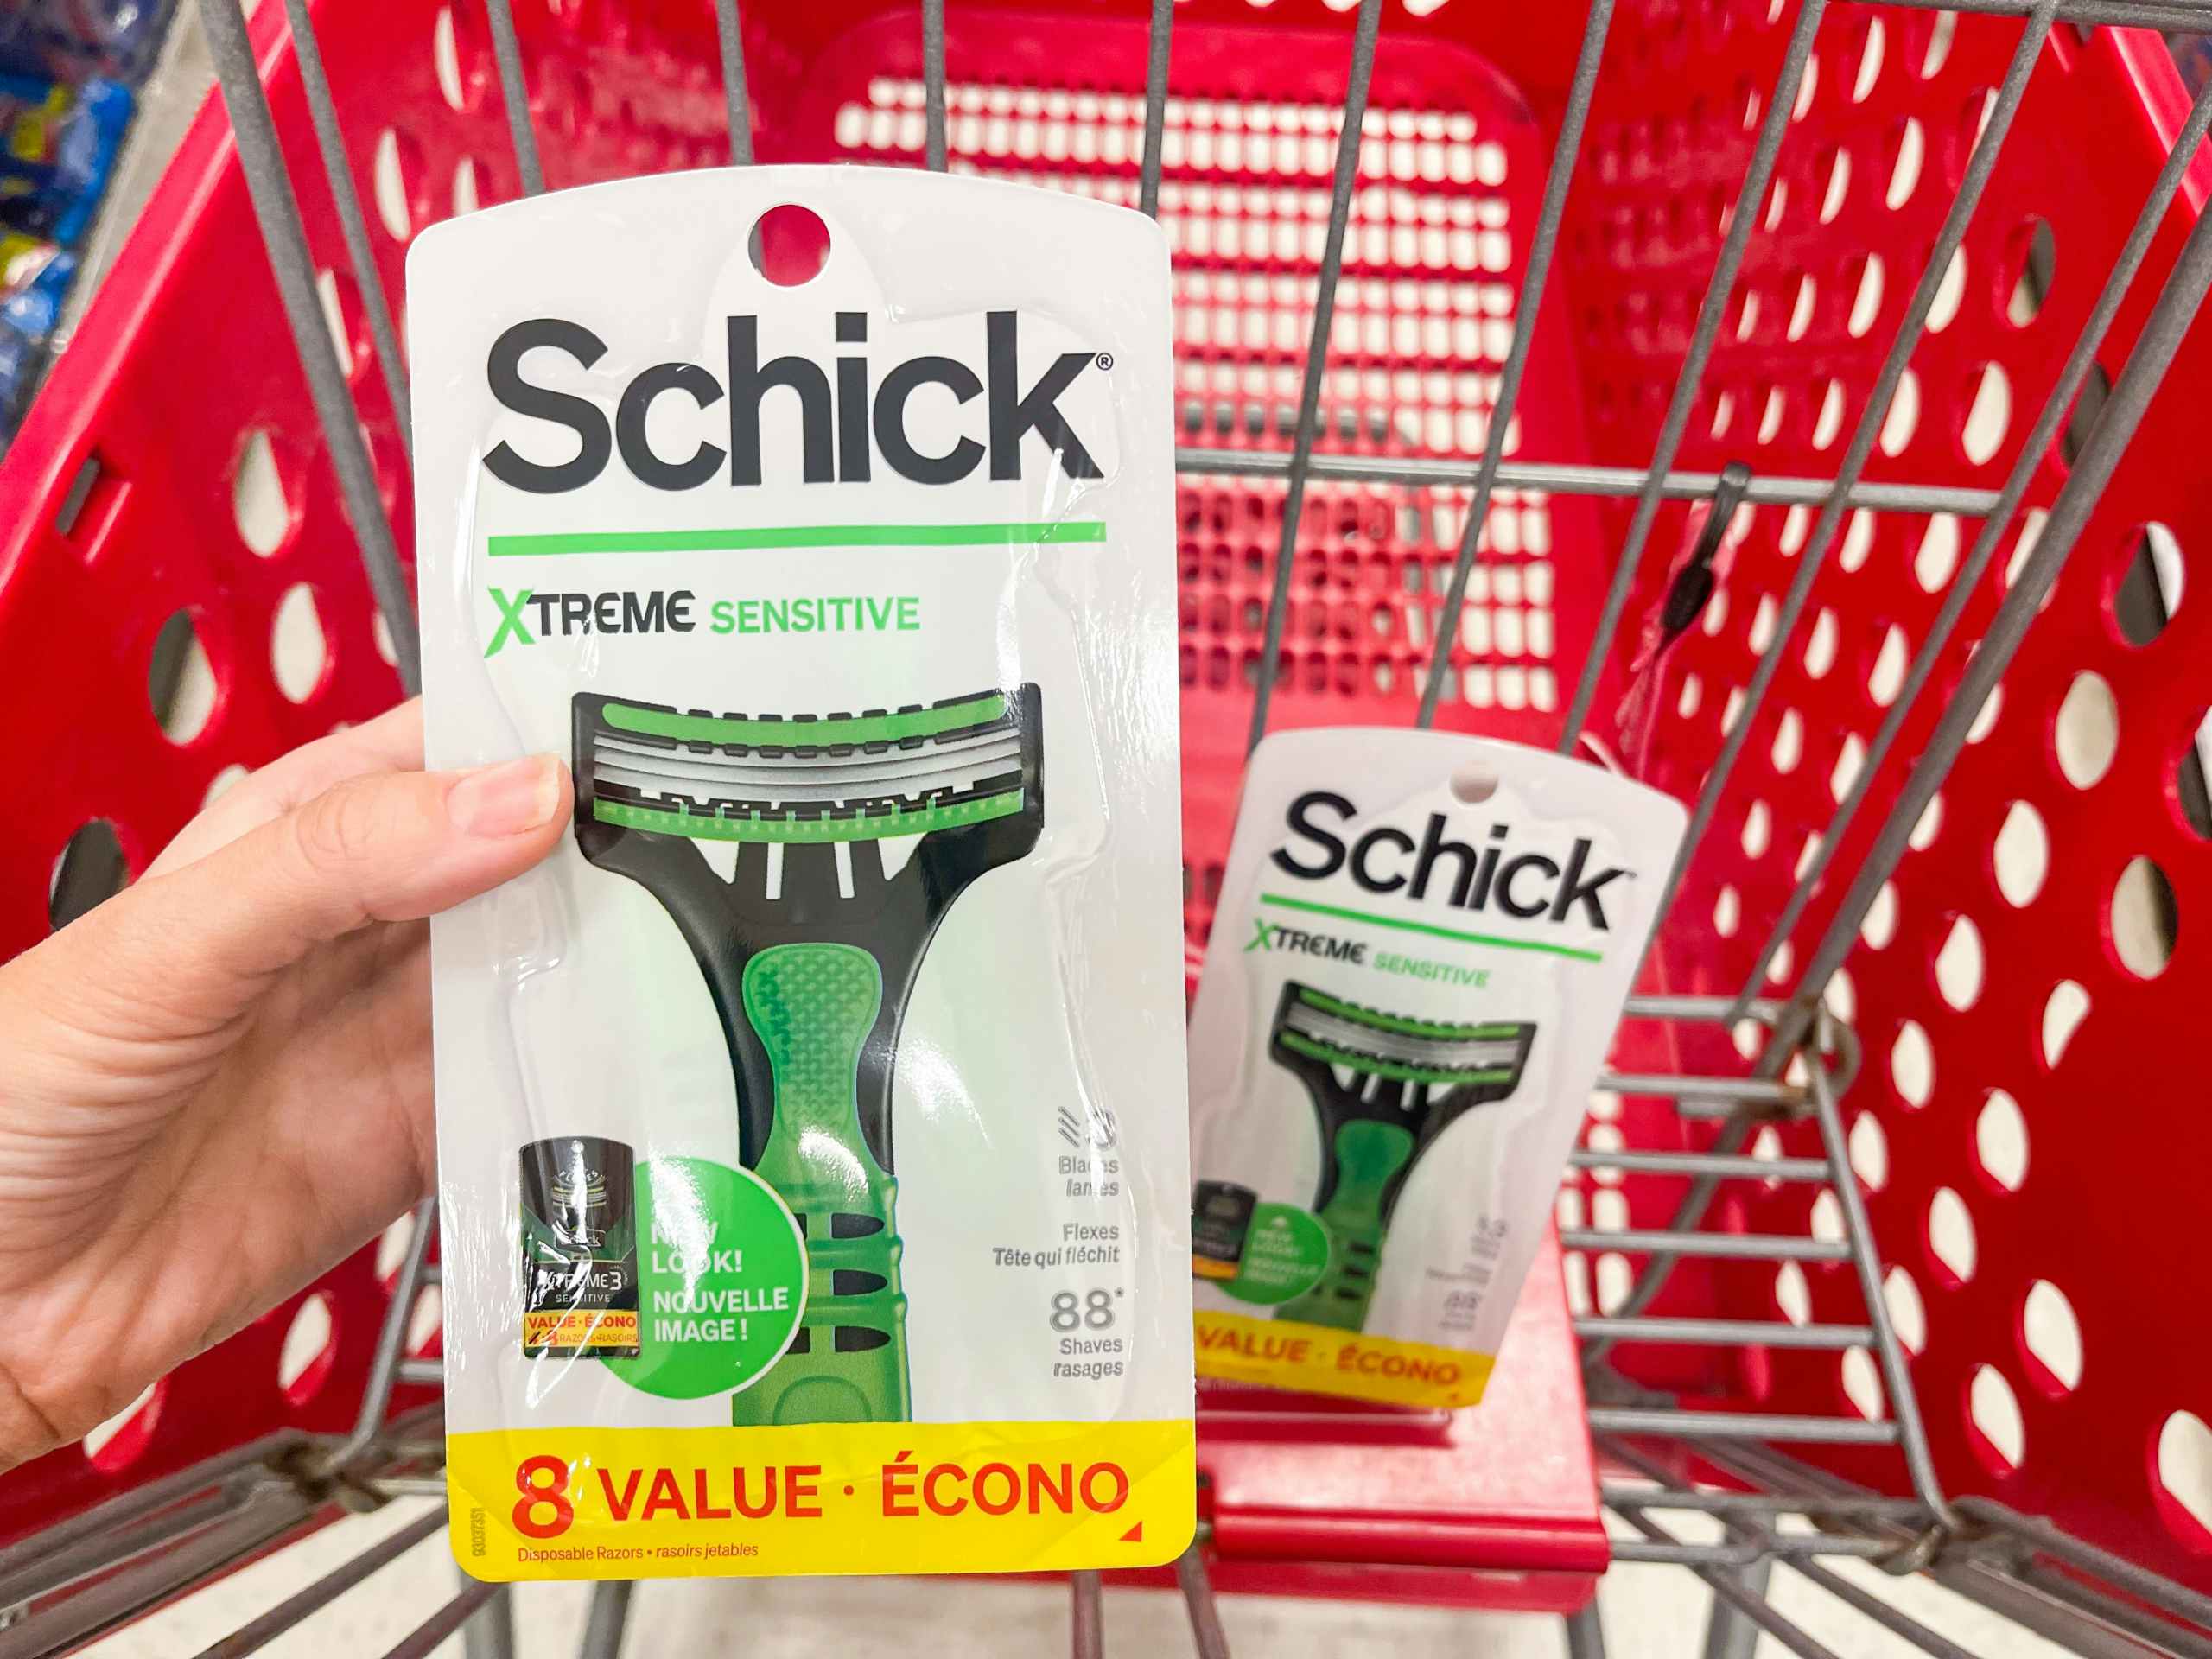 A Schick Xtreme Sensitive razor held out by hand in front of another Schick razor sitting in a cart.